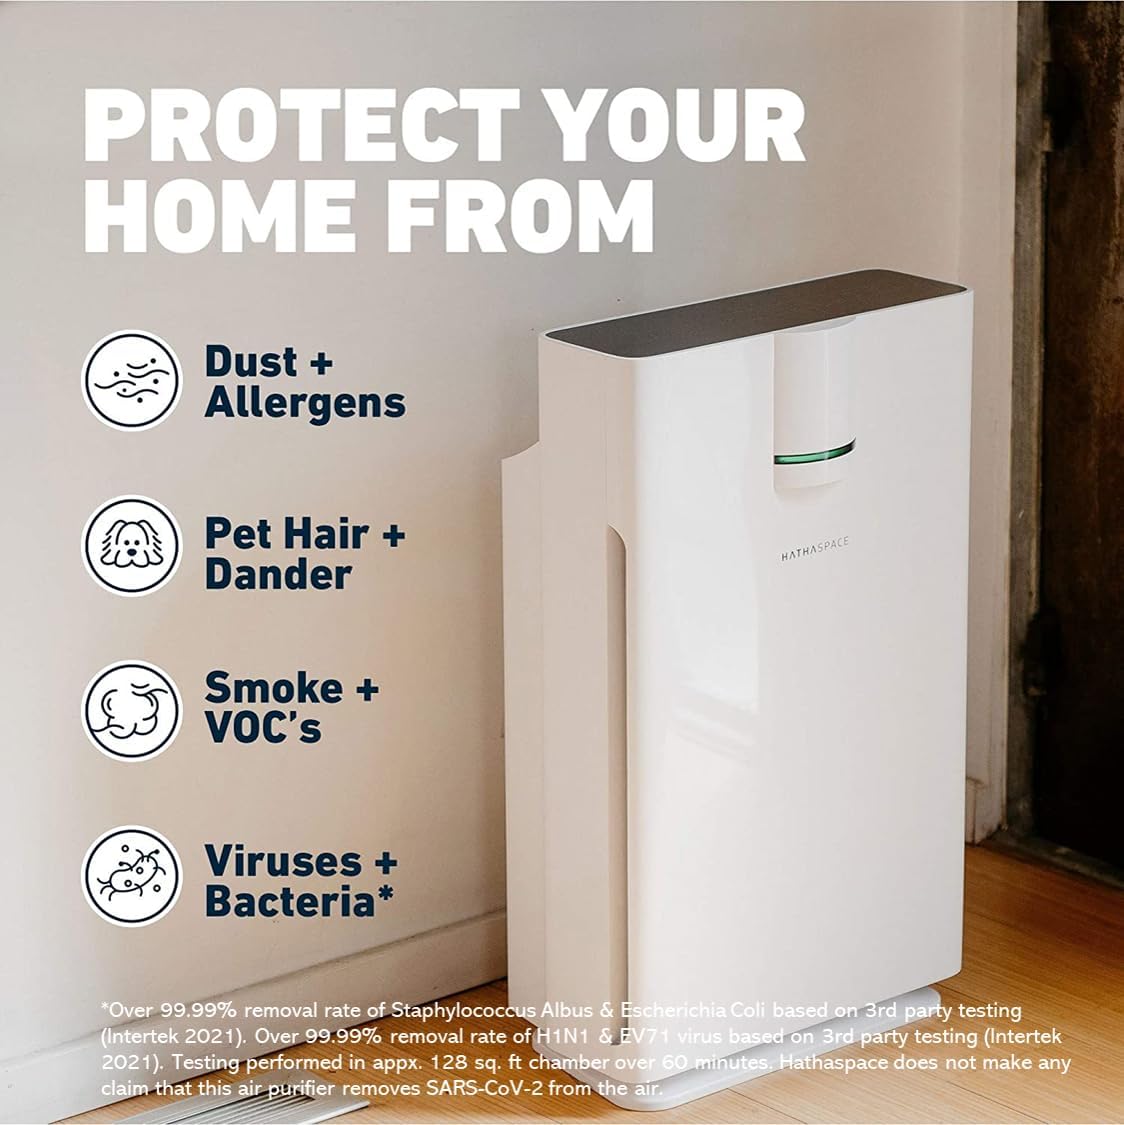 HATHASPACE Smart Air Purifiers for Home, Large Rooms - HSP002 - True HEPA Air Purifier, Cleaner & Filter for Allergies,